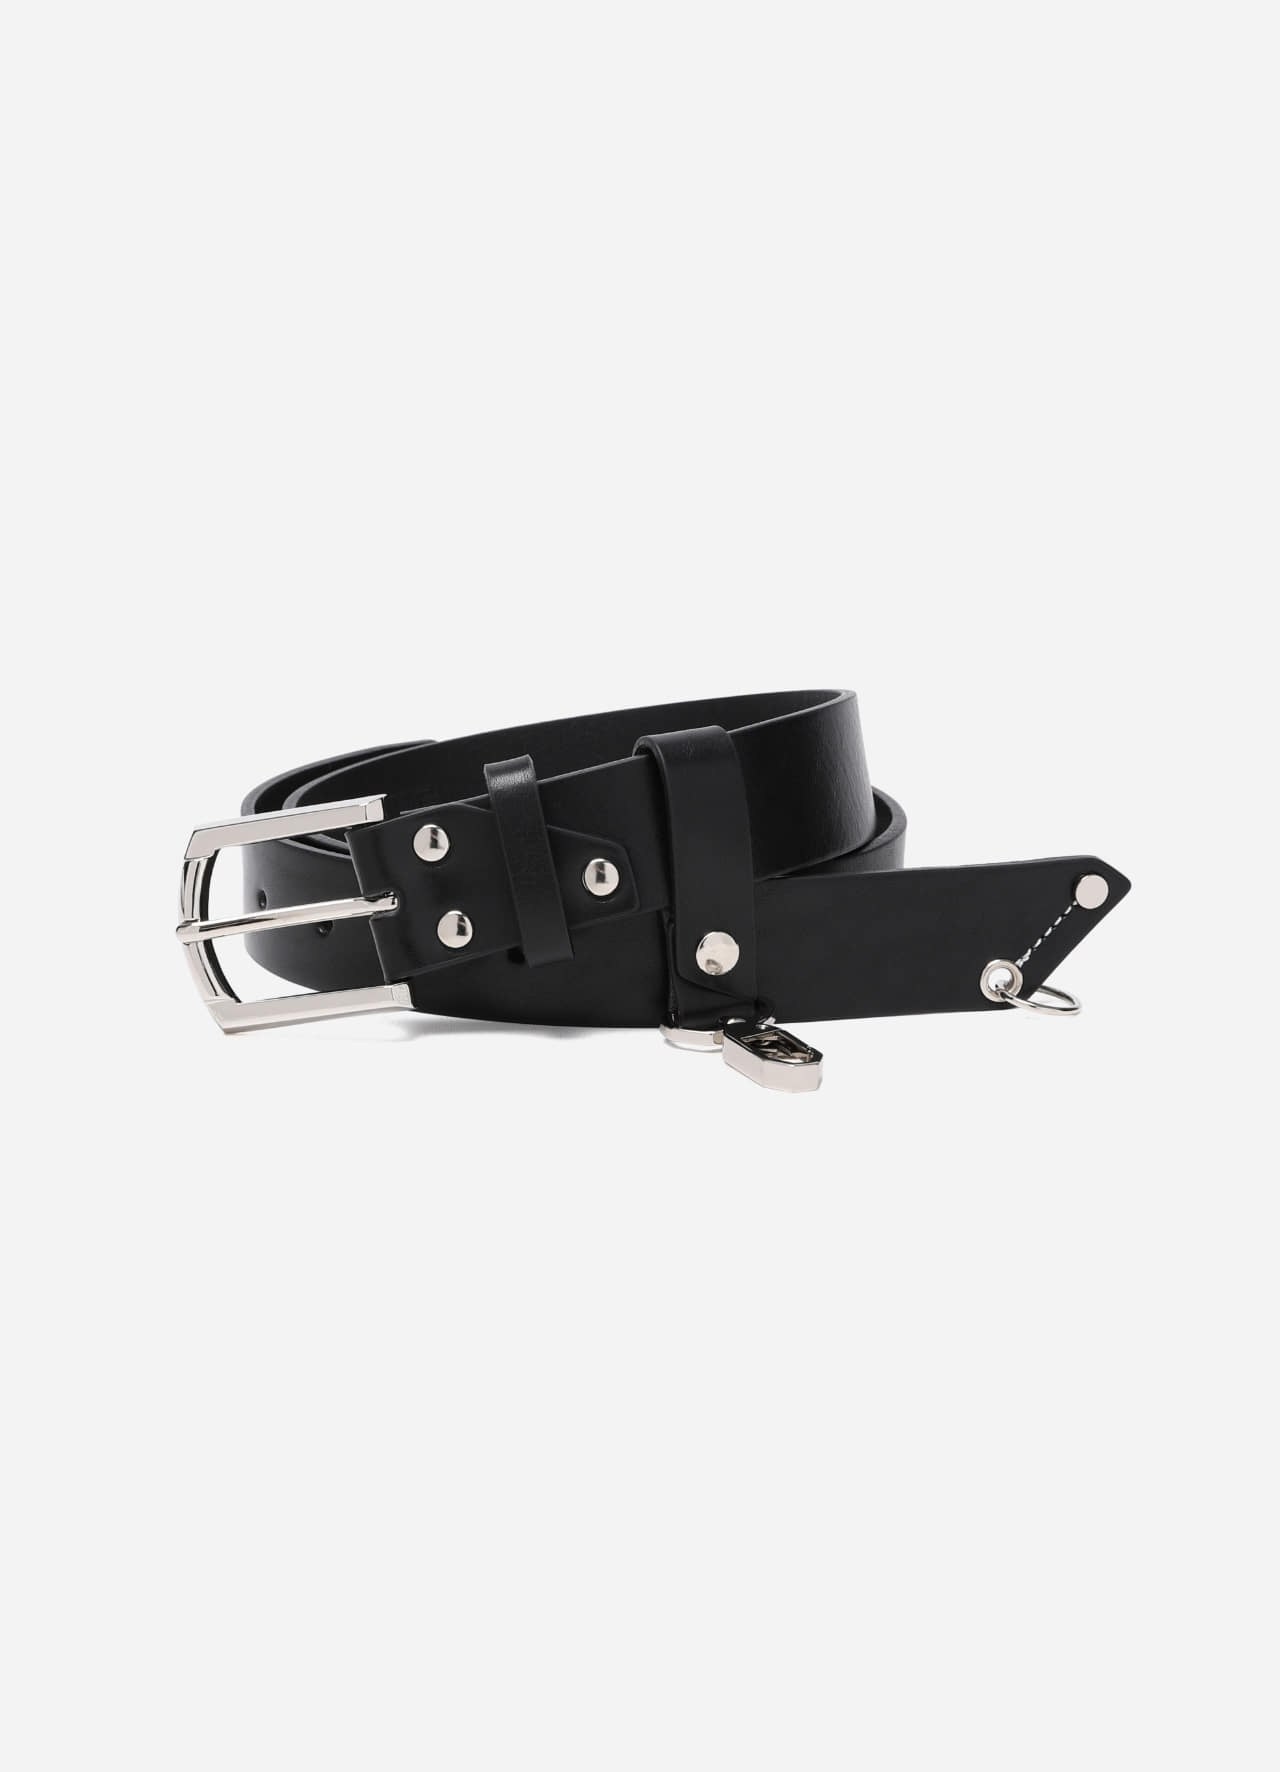 [LLUD Exclusive] Division Stitch belt